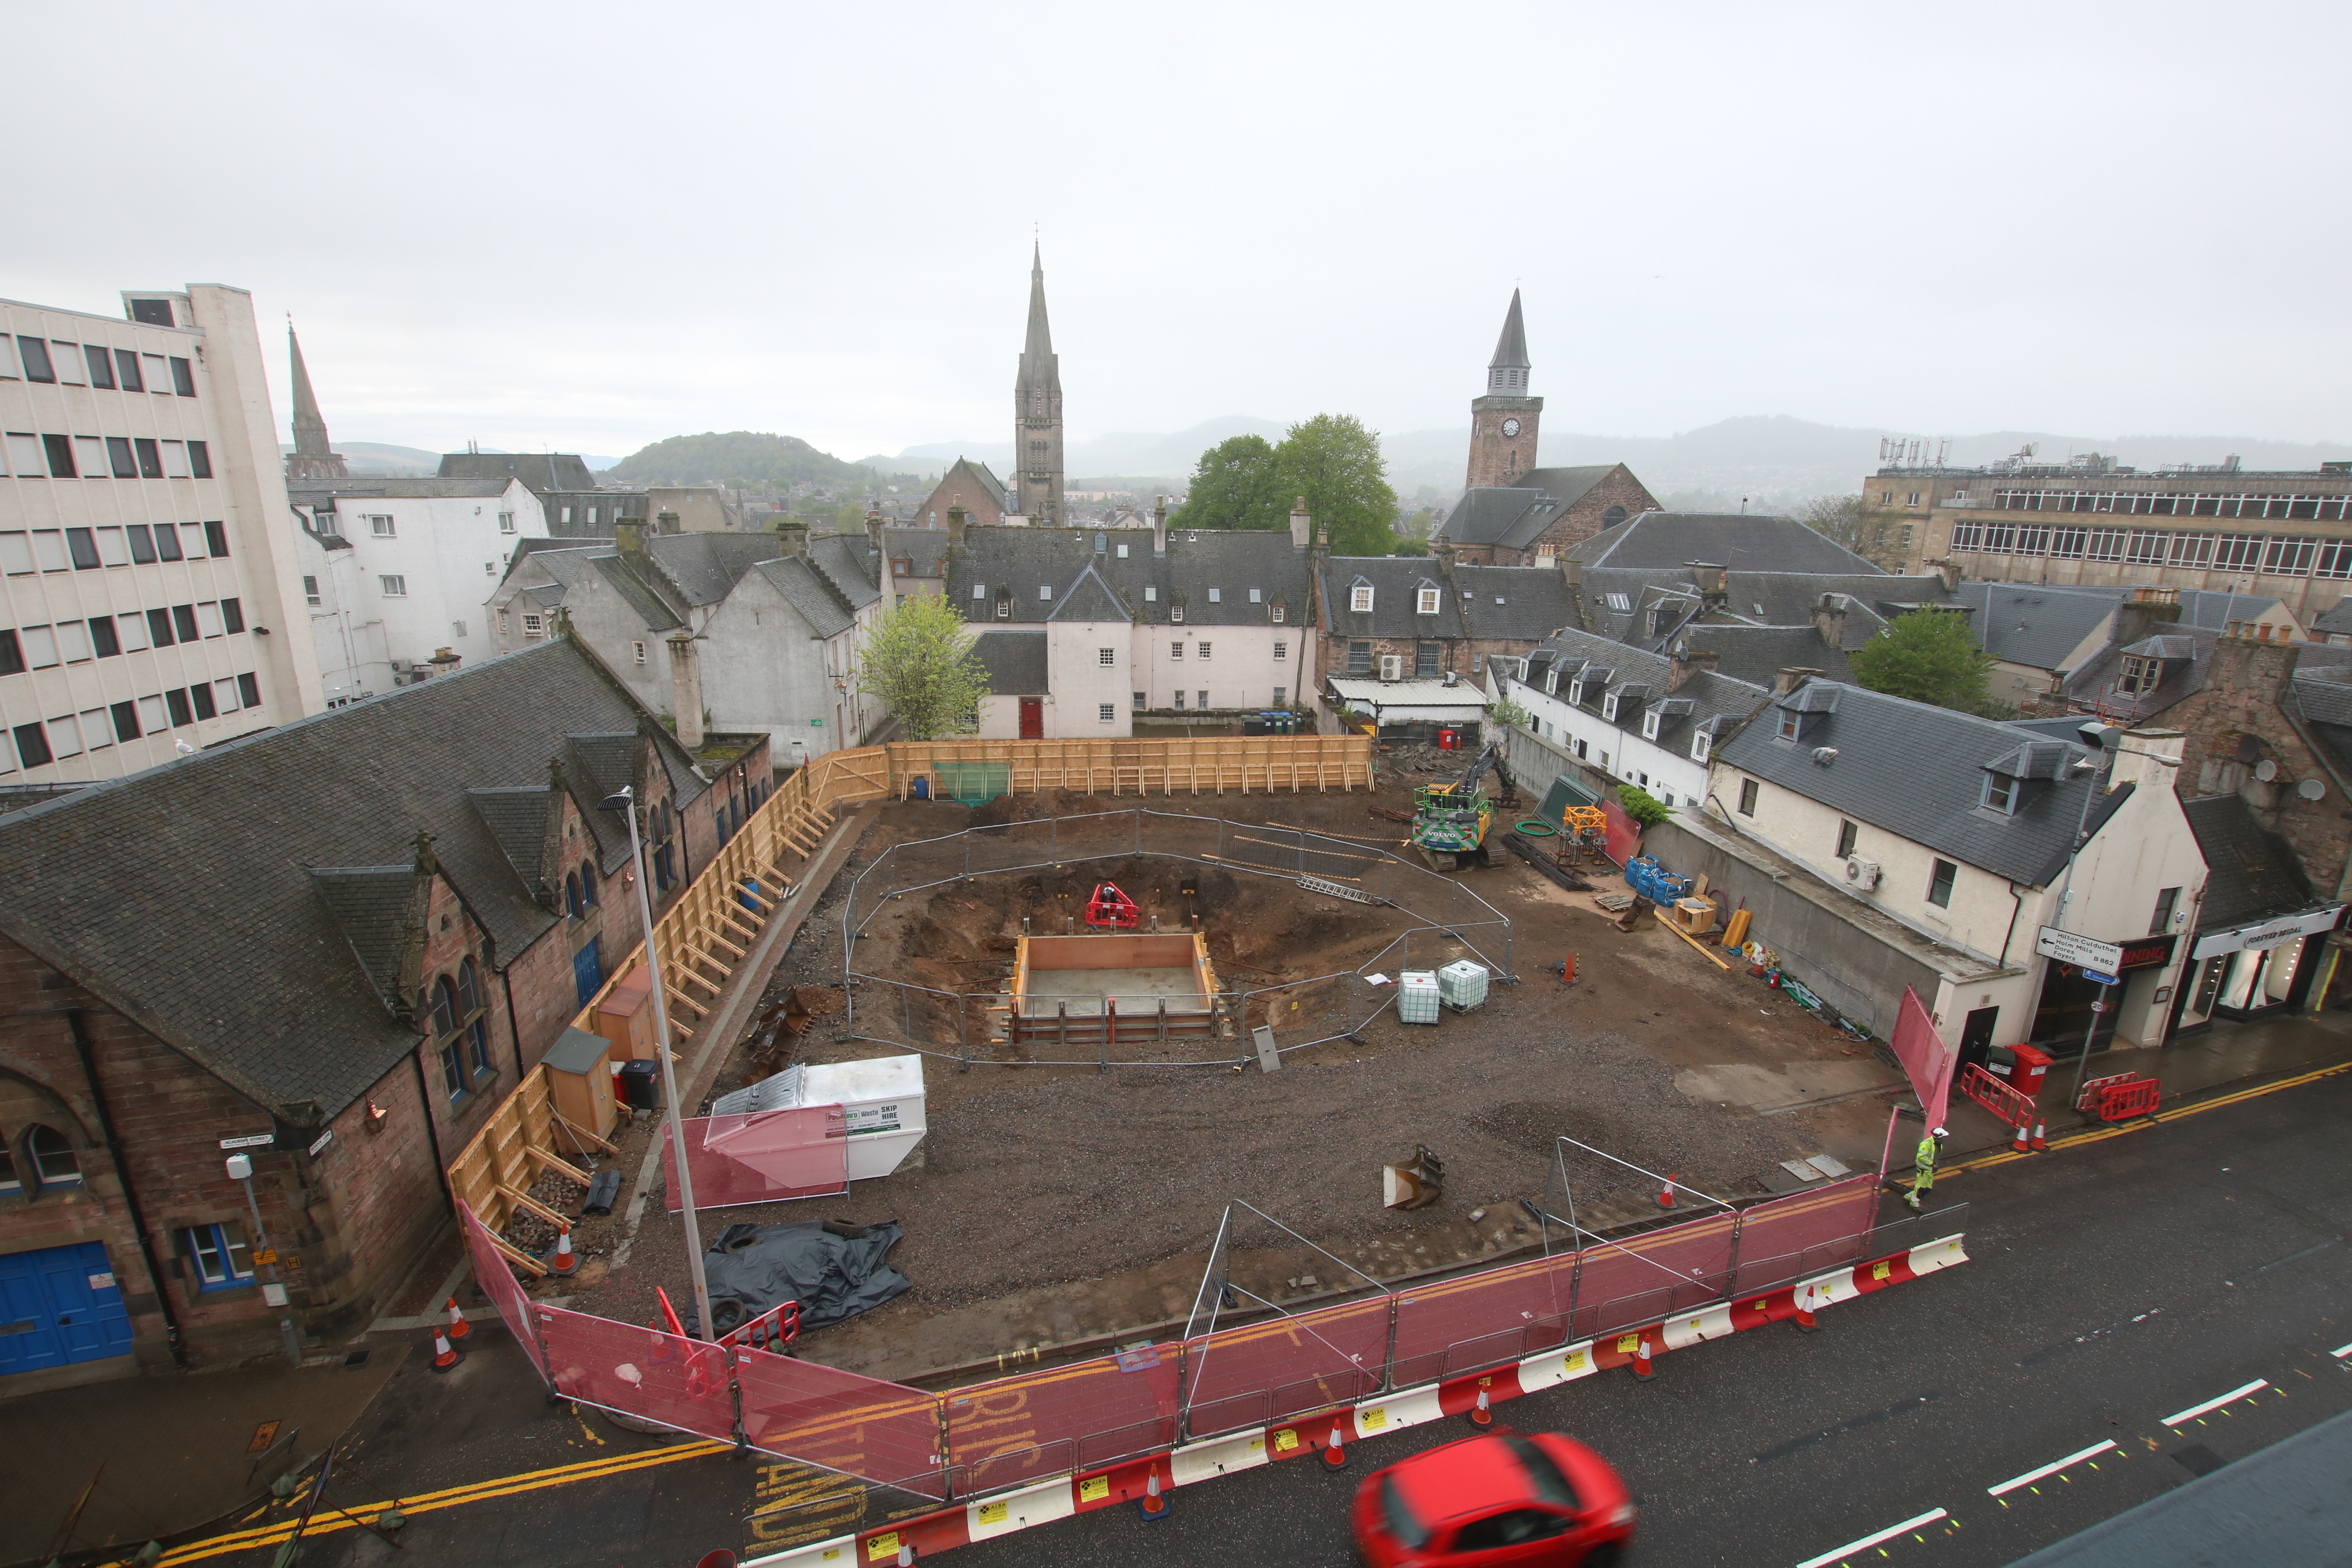 New homes for Inverness city centre under way